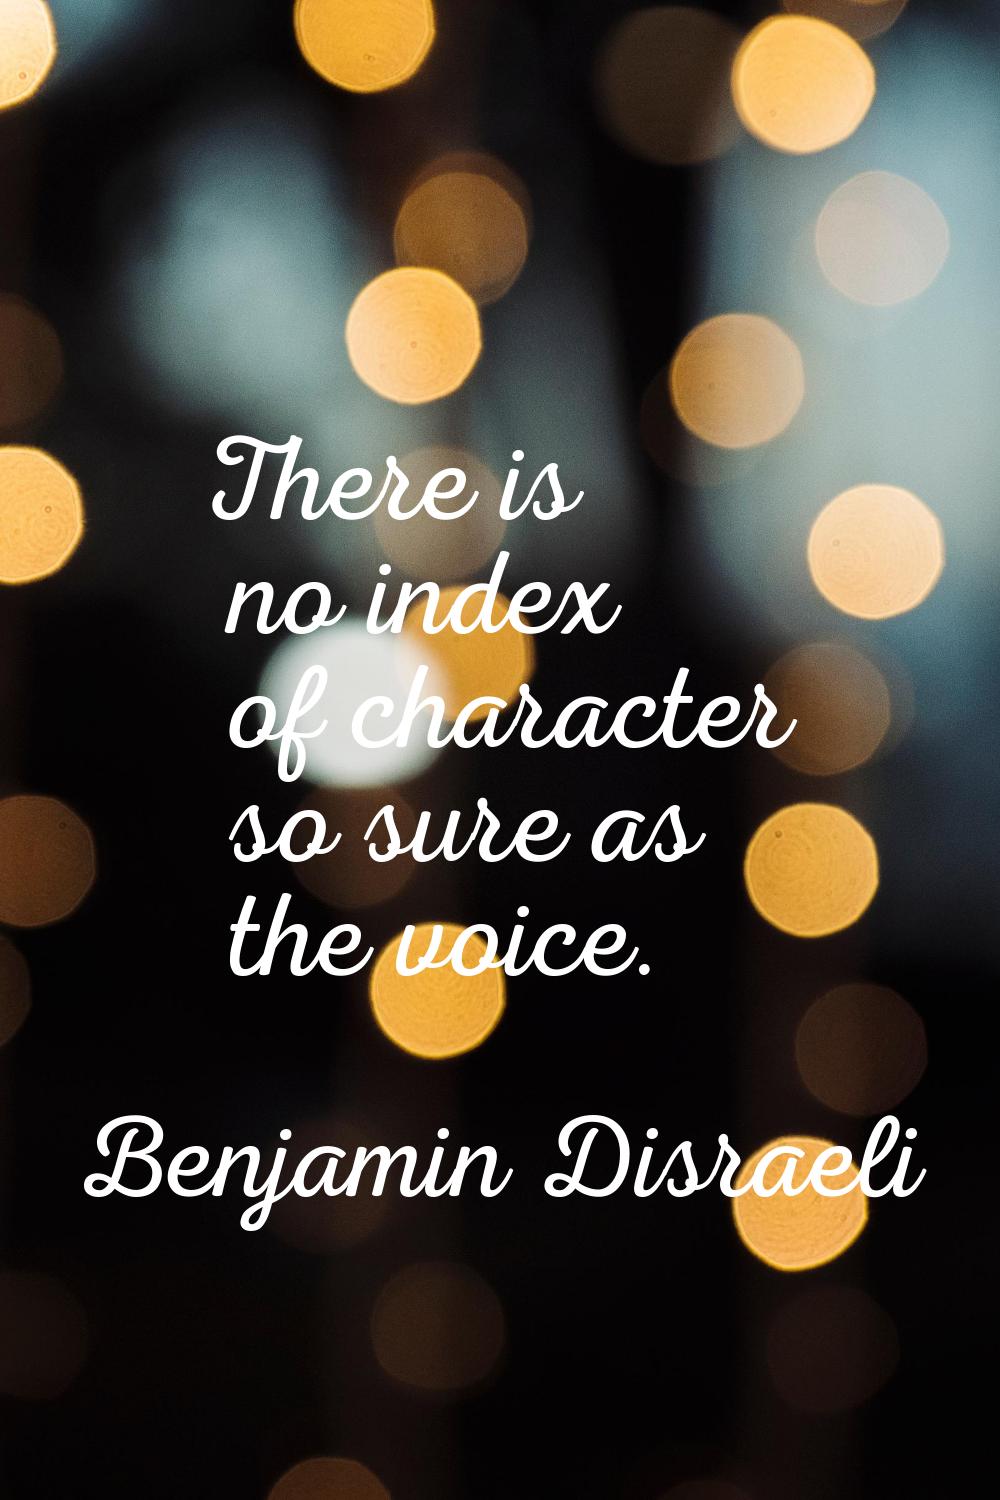 There is no index of character so sure as the voice.